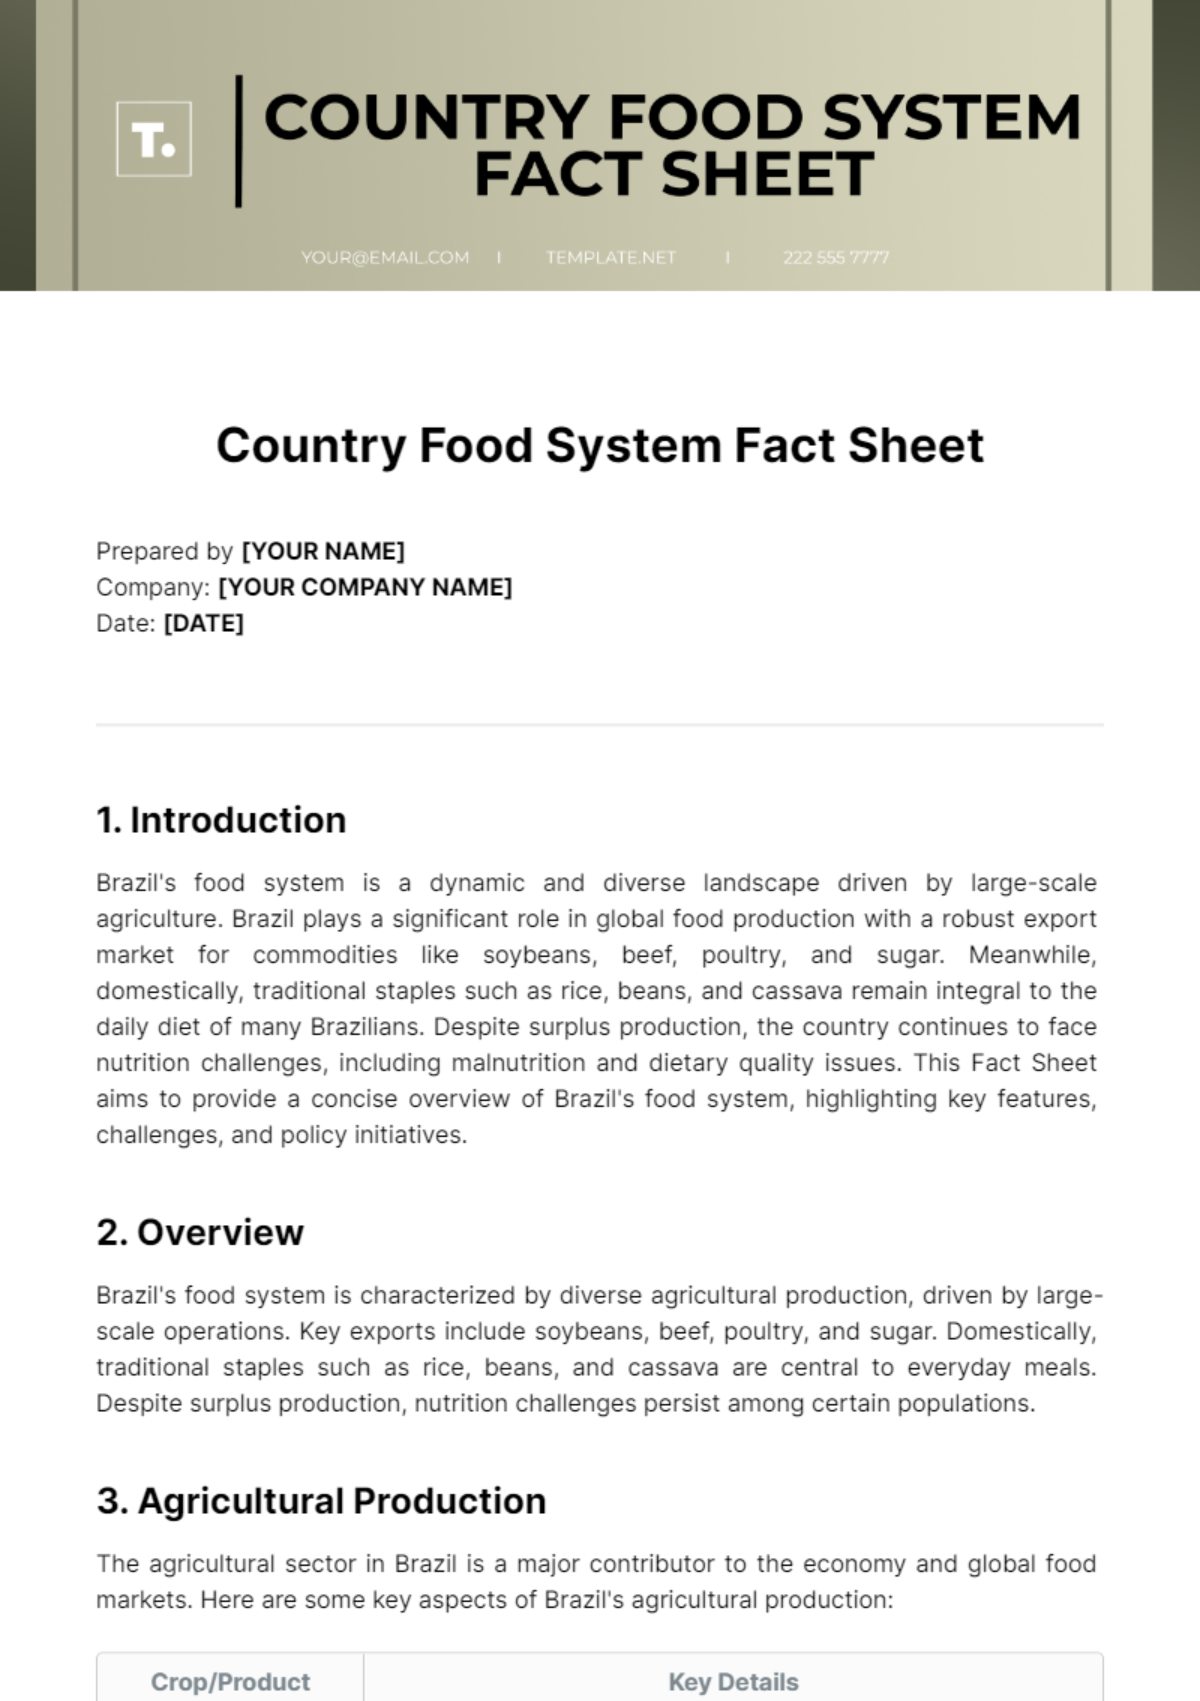 Country Food System Fact Sheet Template